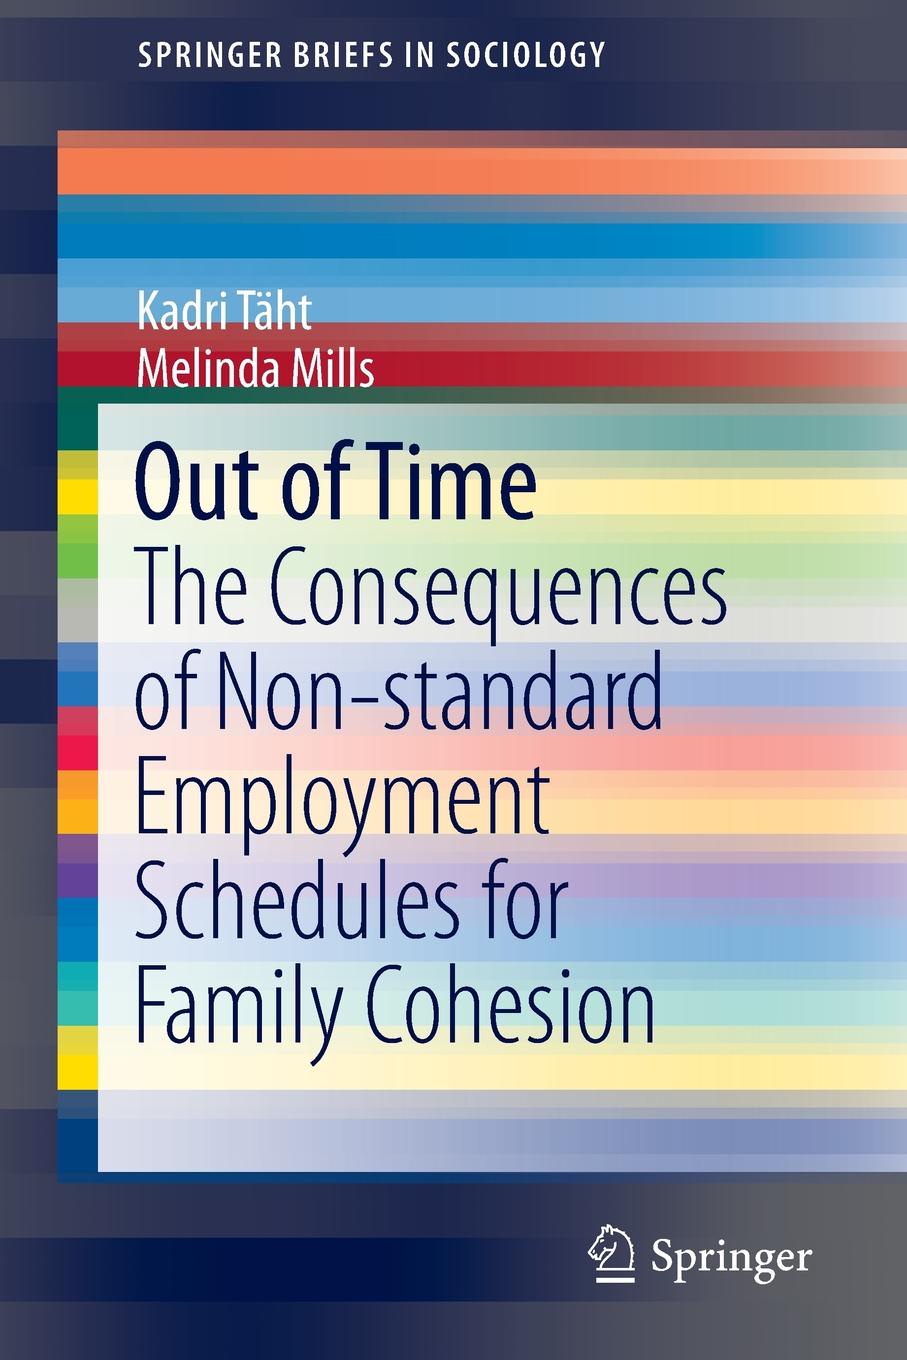 Out of Time. The Consequences of Non-standard Employment Schedules for Family Cohesion